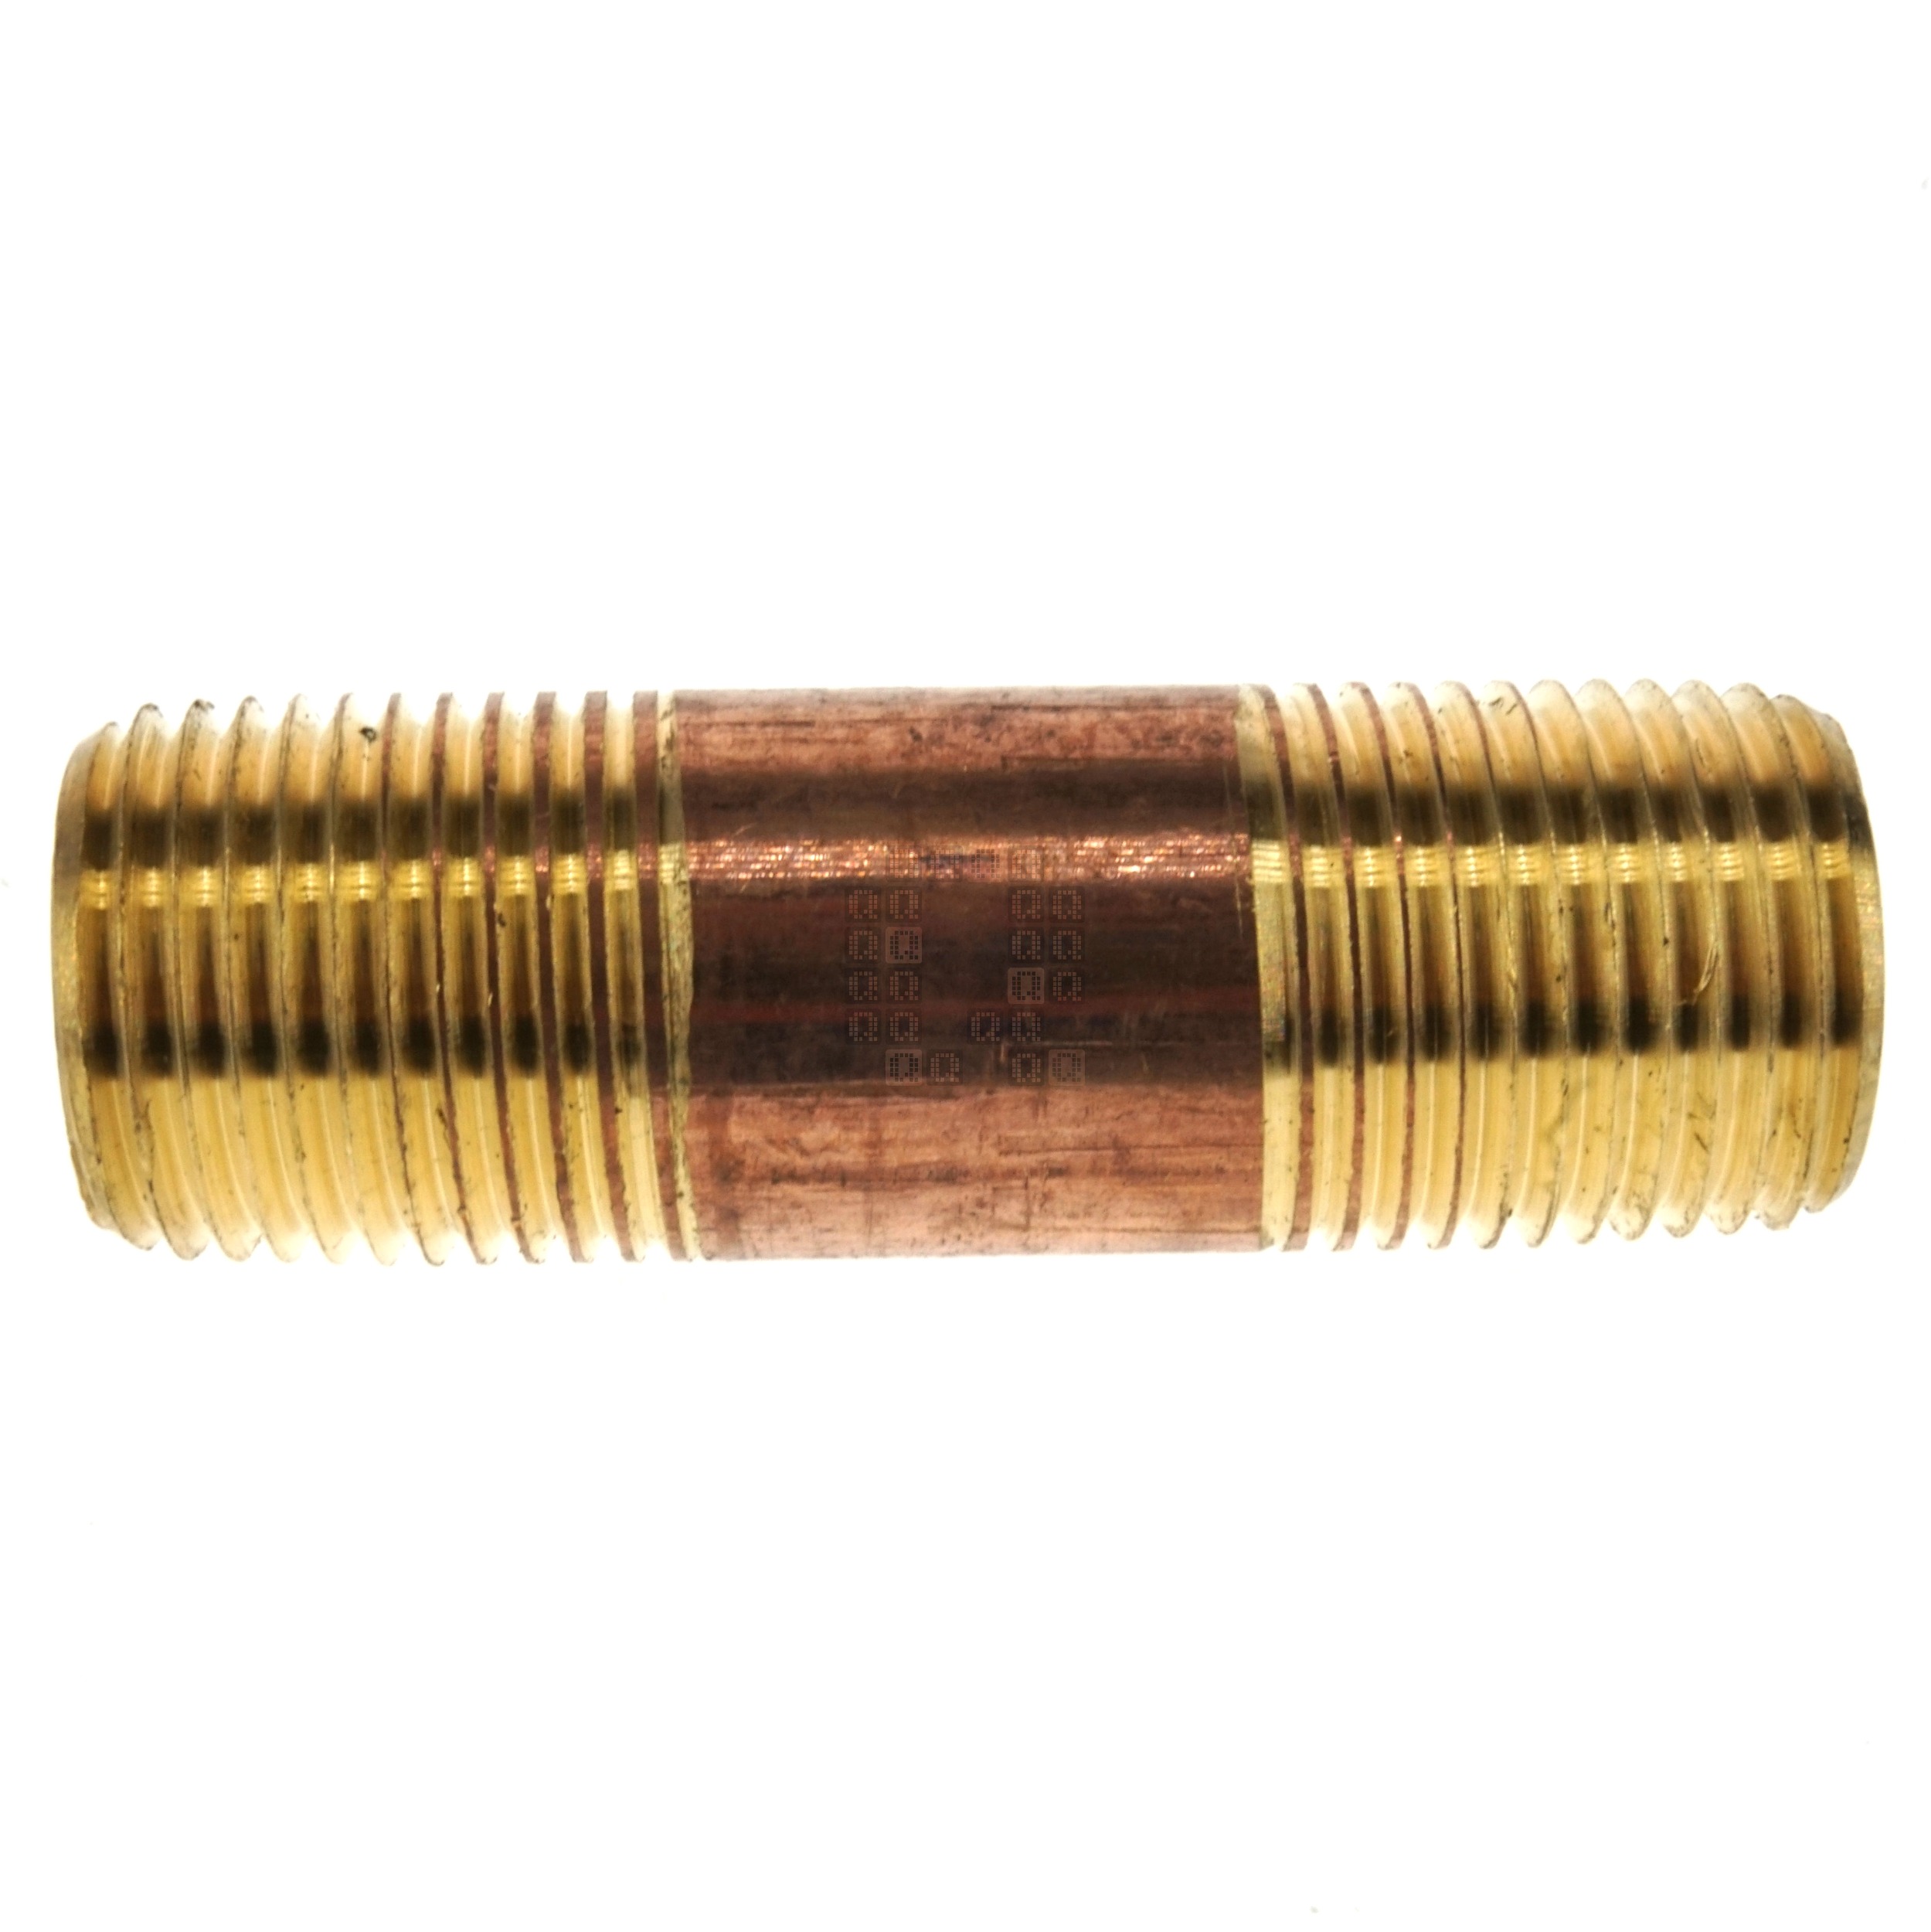 Anderson Metals 38300-0825 1/2" x 2-1/2" Red Brass Pipe Nipple